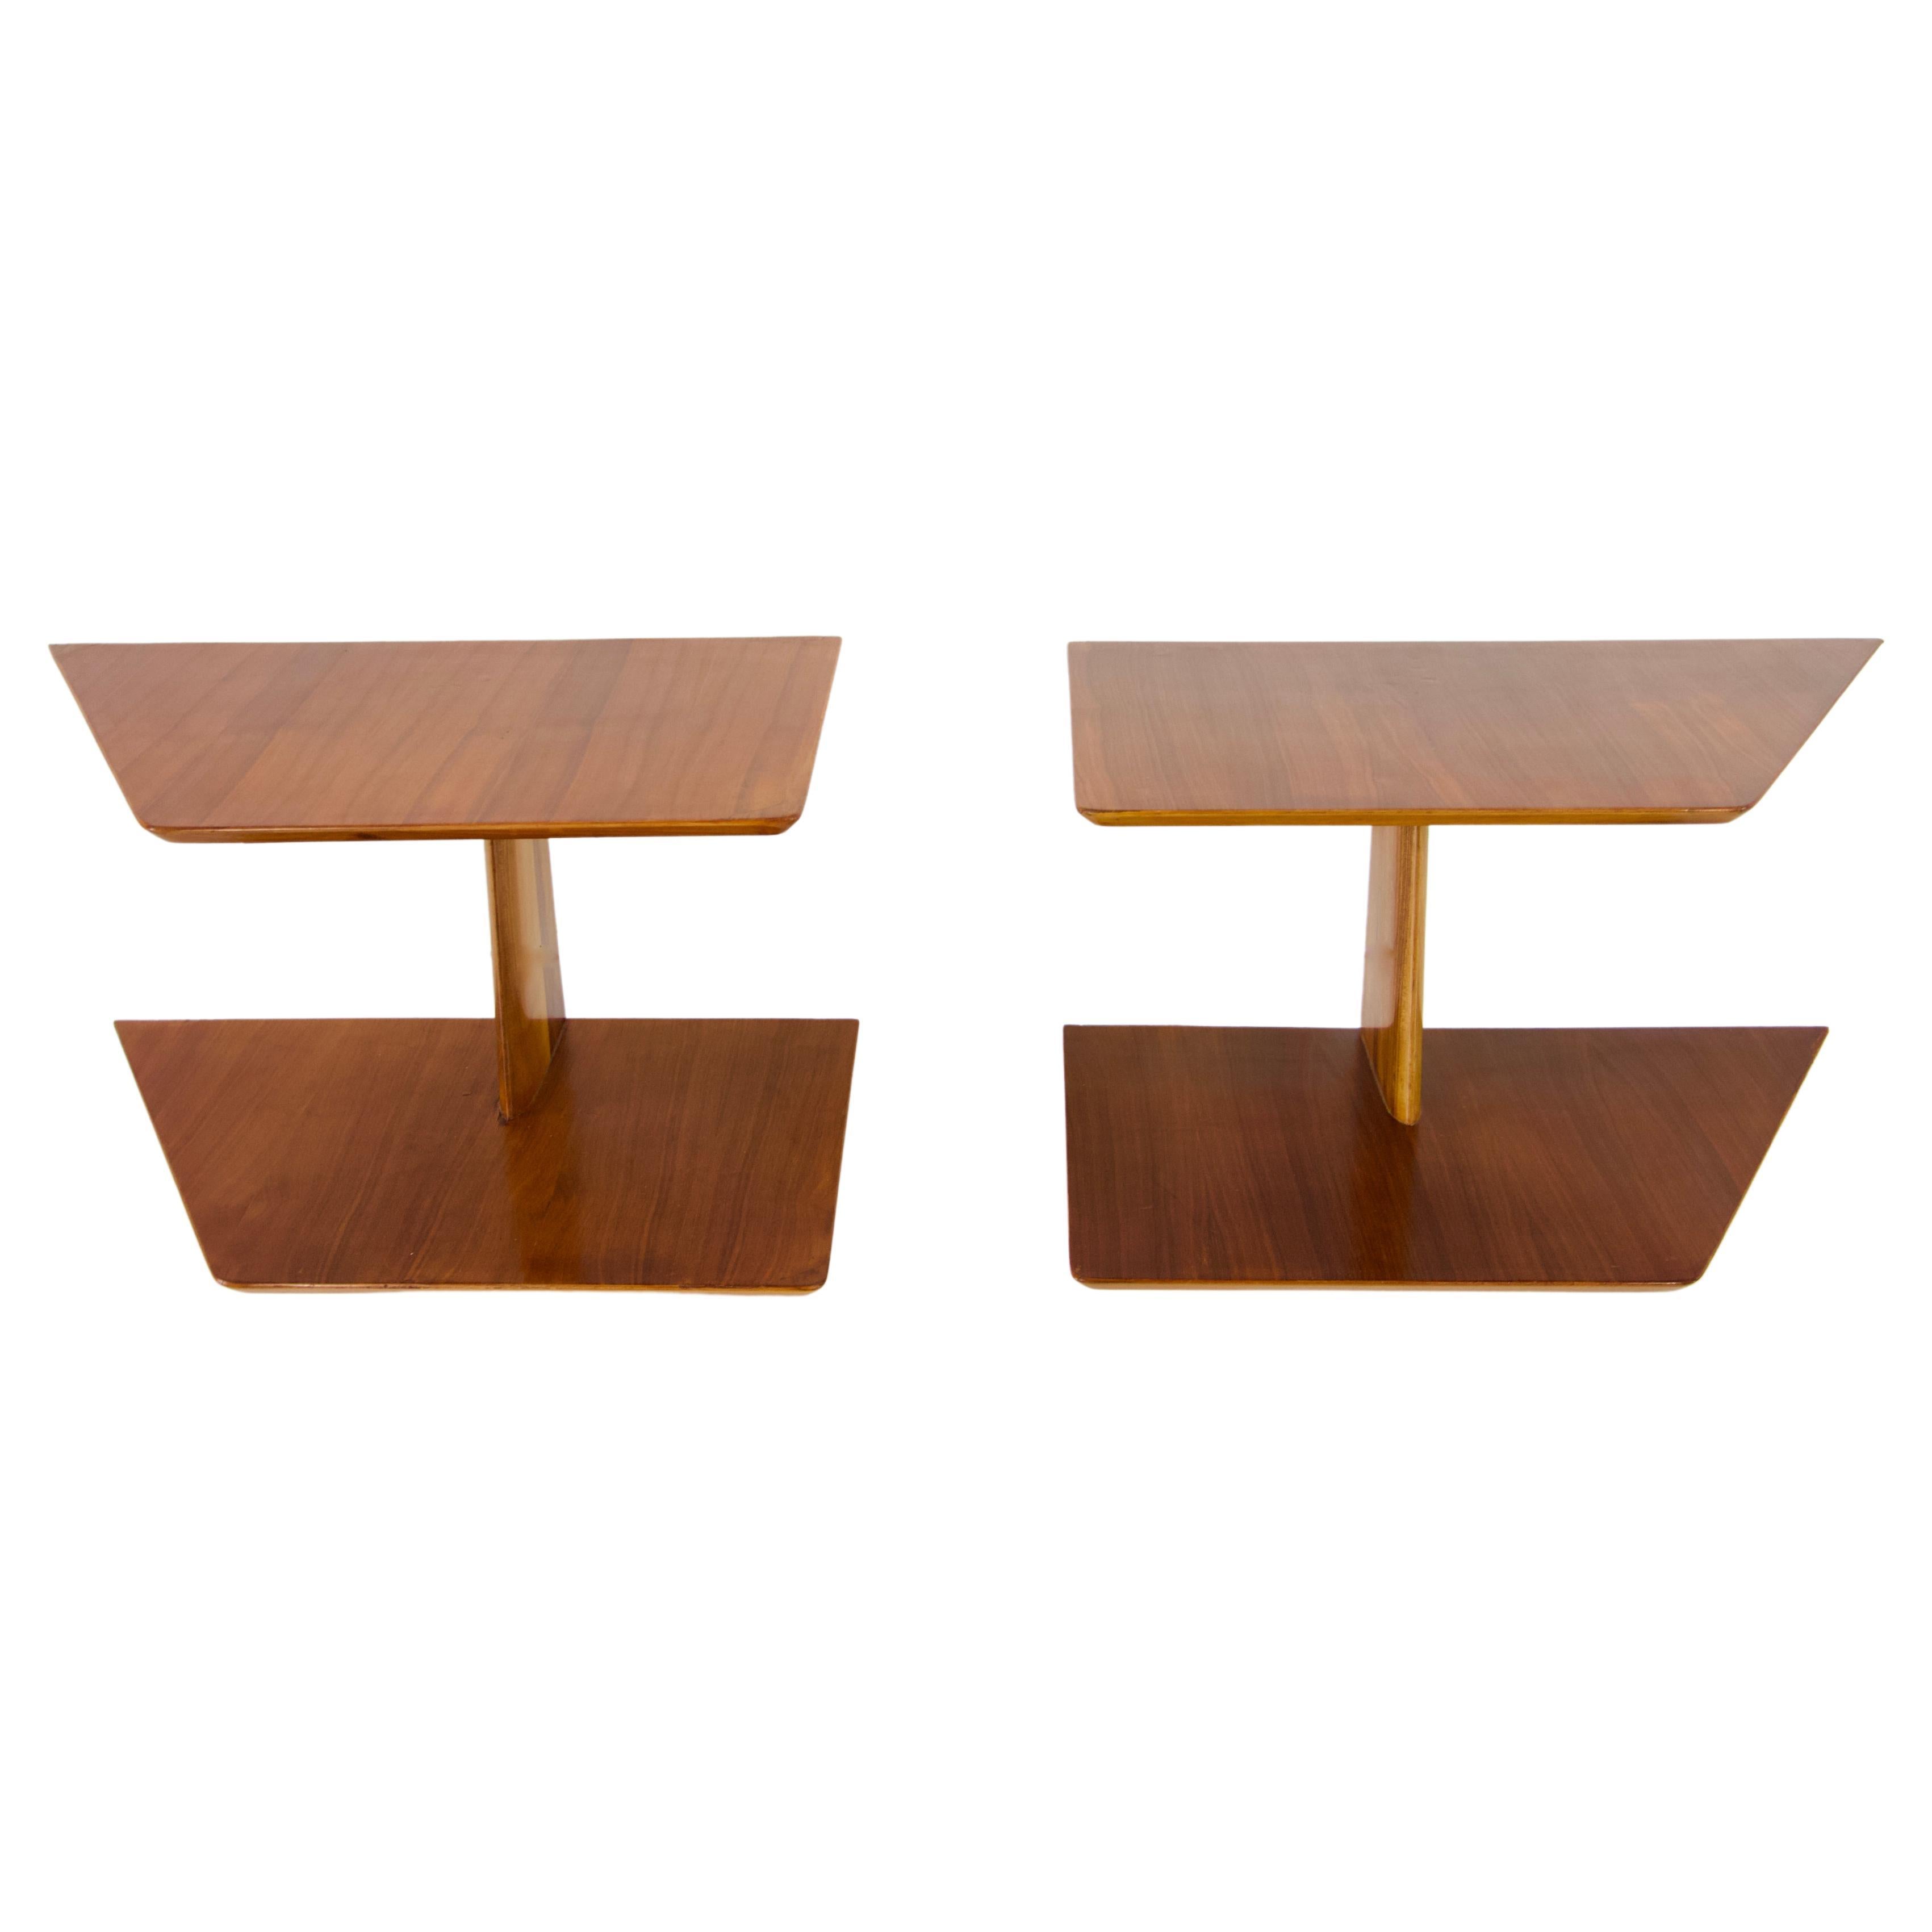 pair of GIO PONTI wood hanging nightstand tables, side tables Hotel Royal, 1955